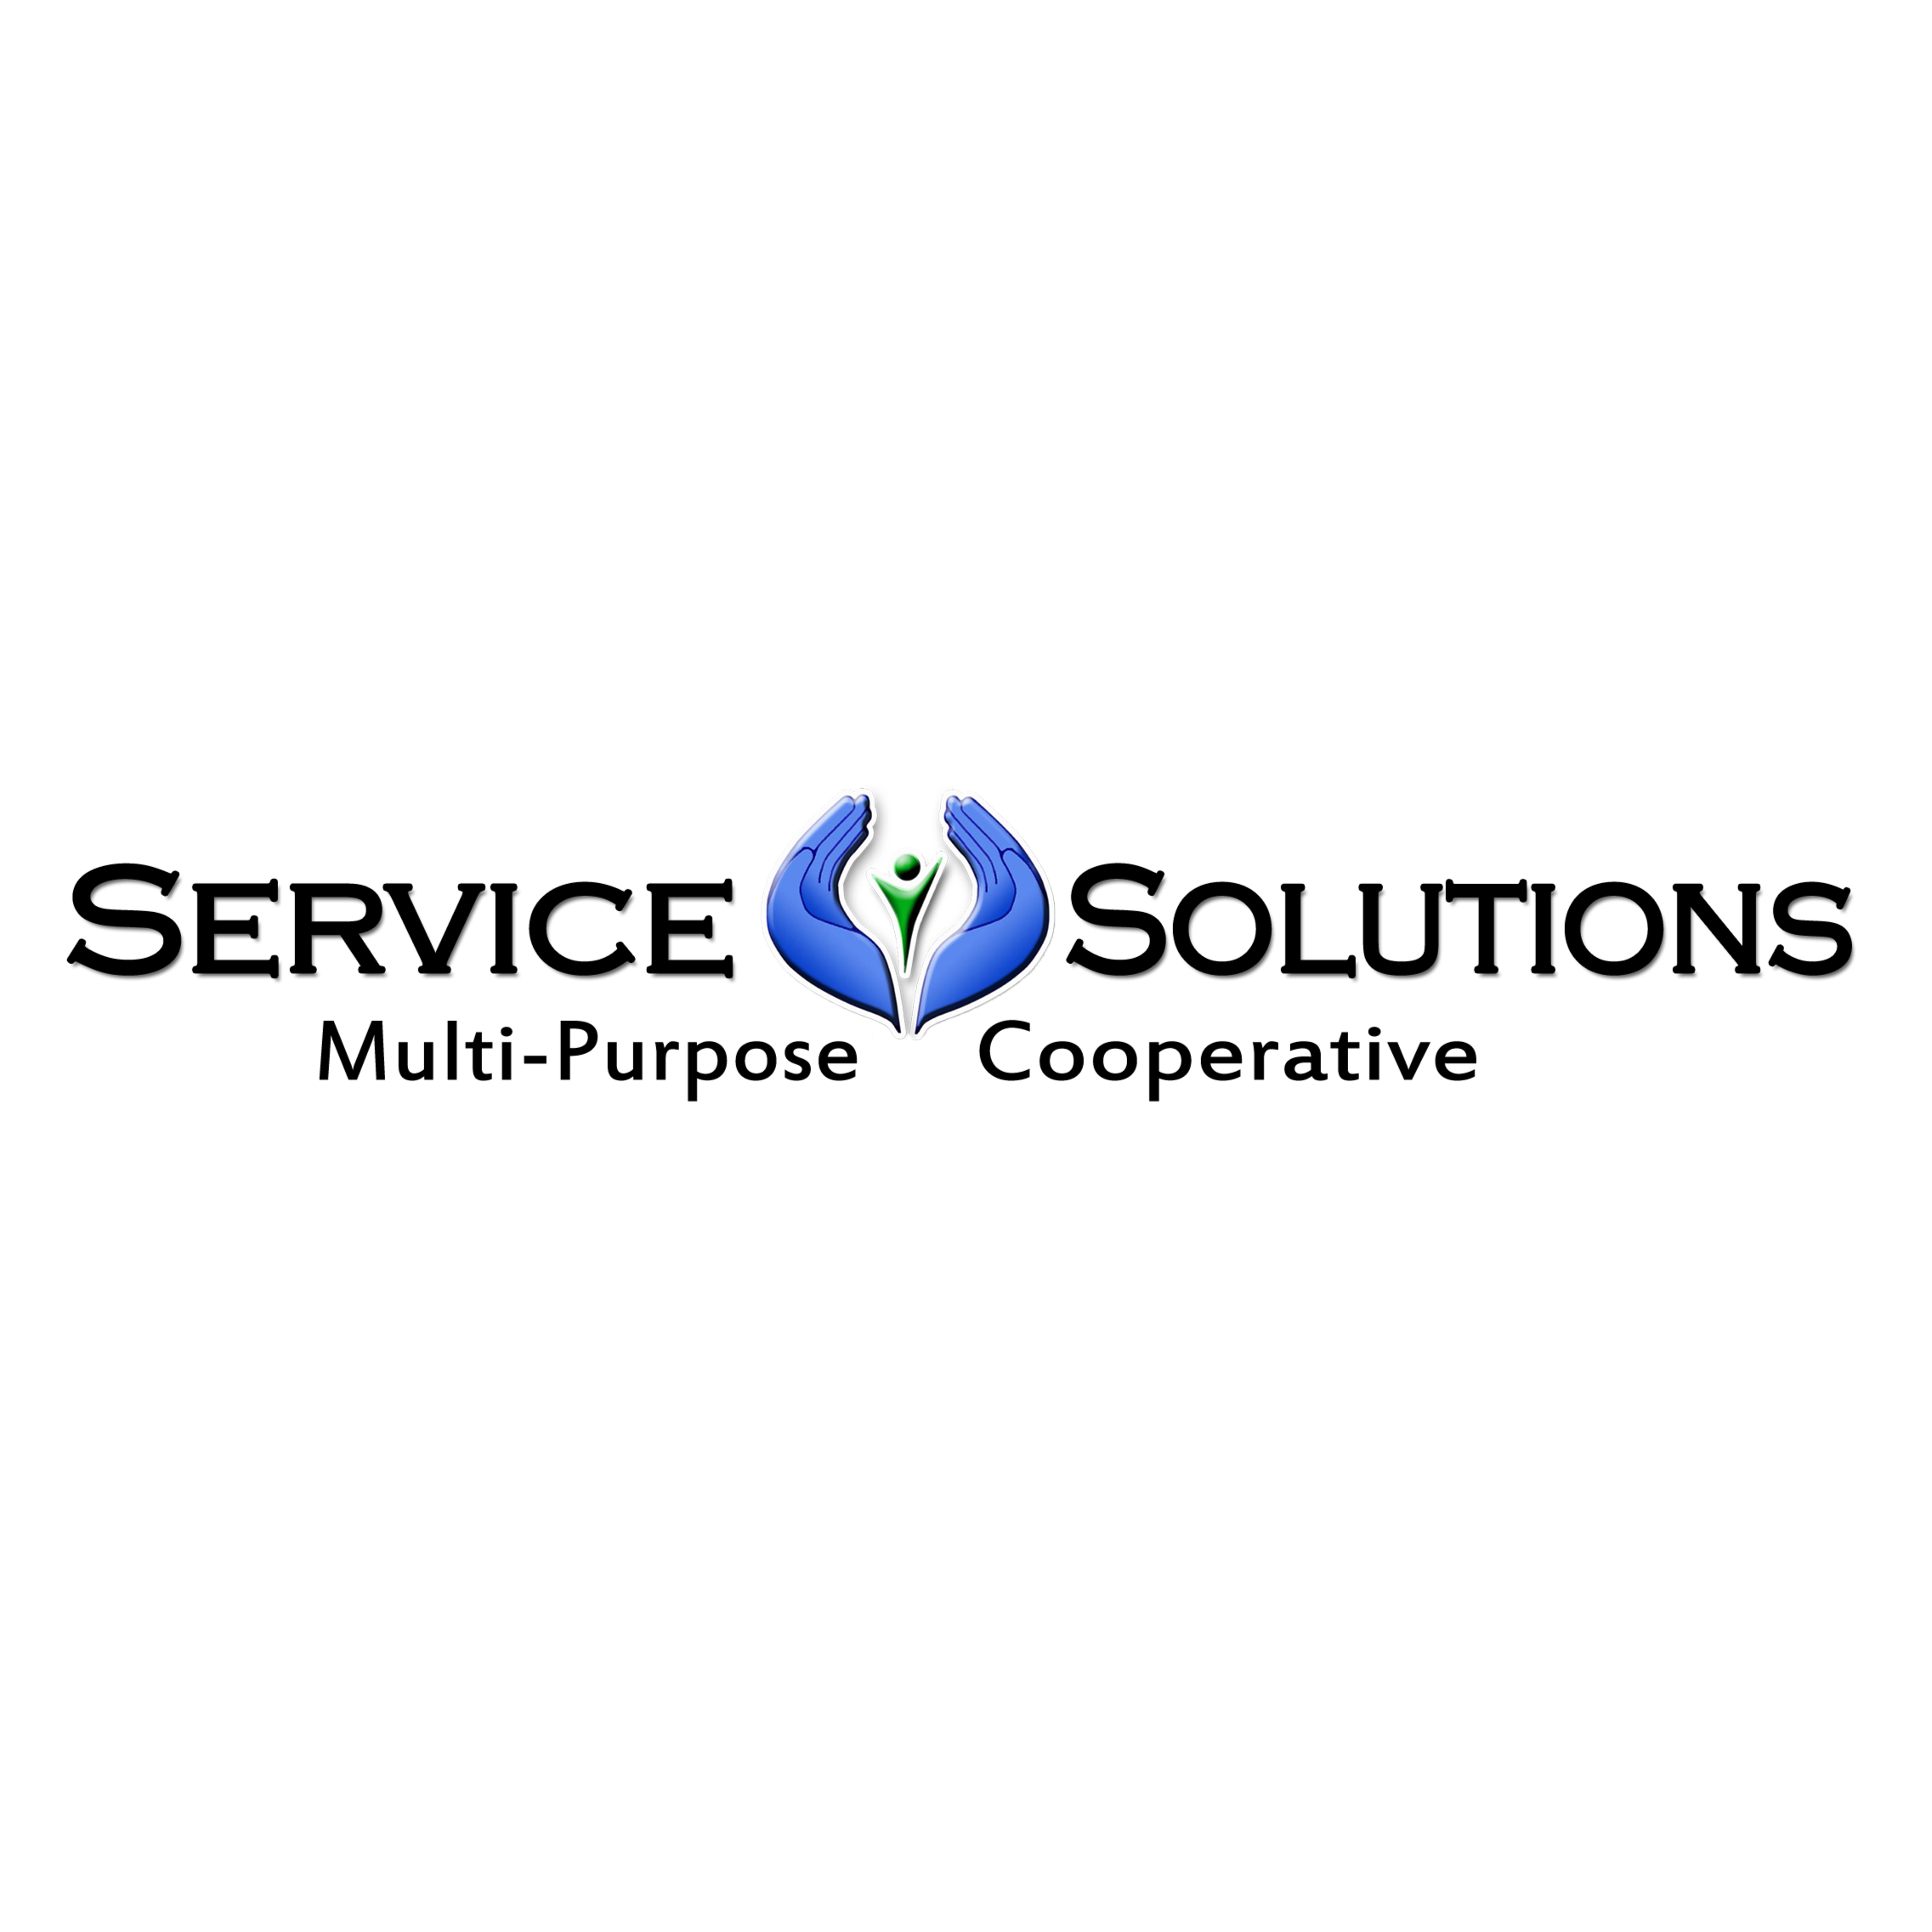 Service solutions